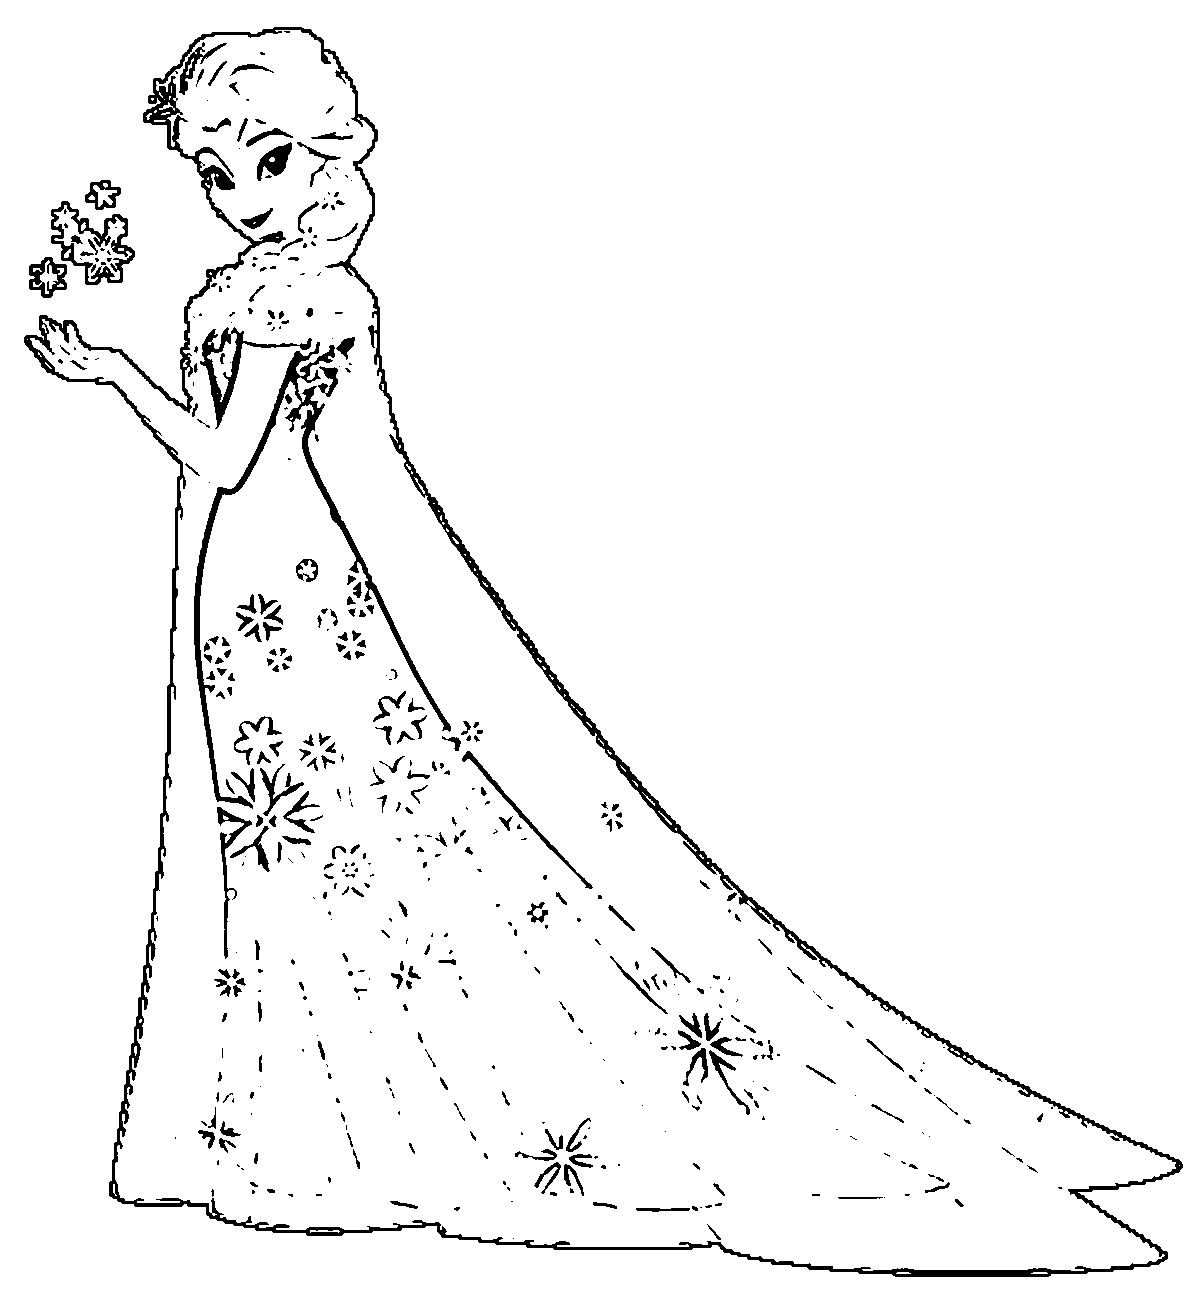 Fever Elsa G Coloring Page | Wecoloringpage